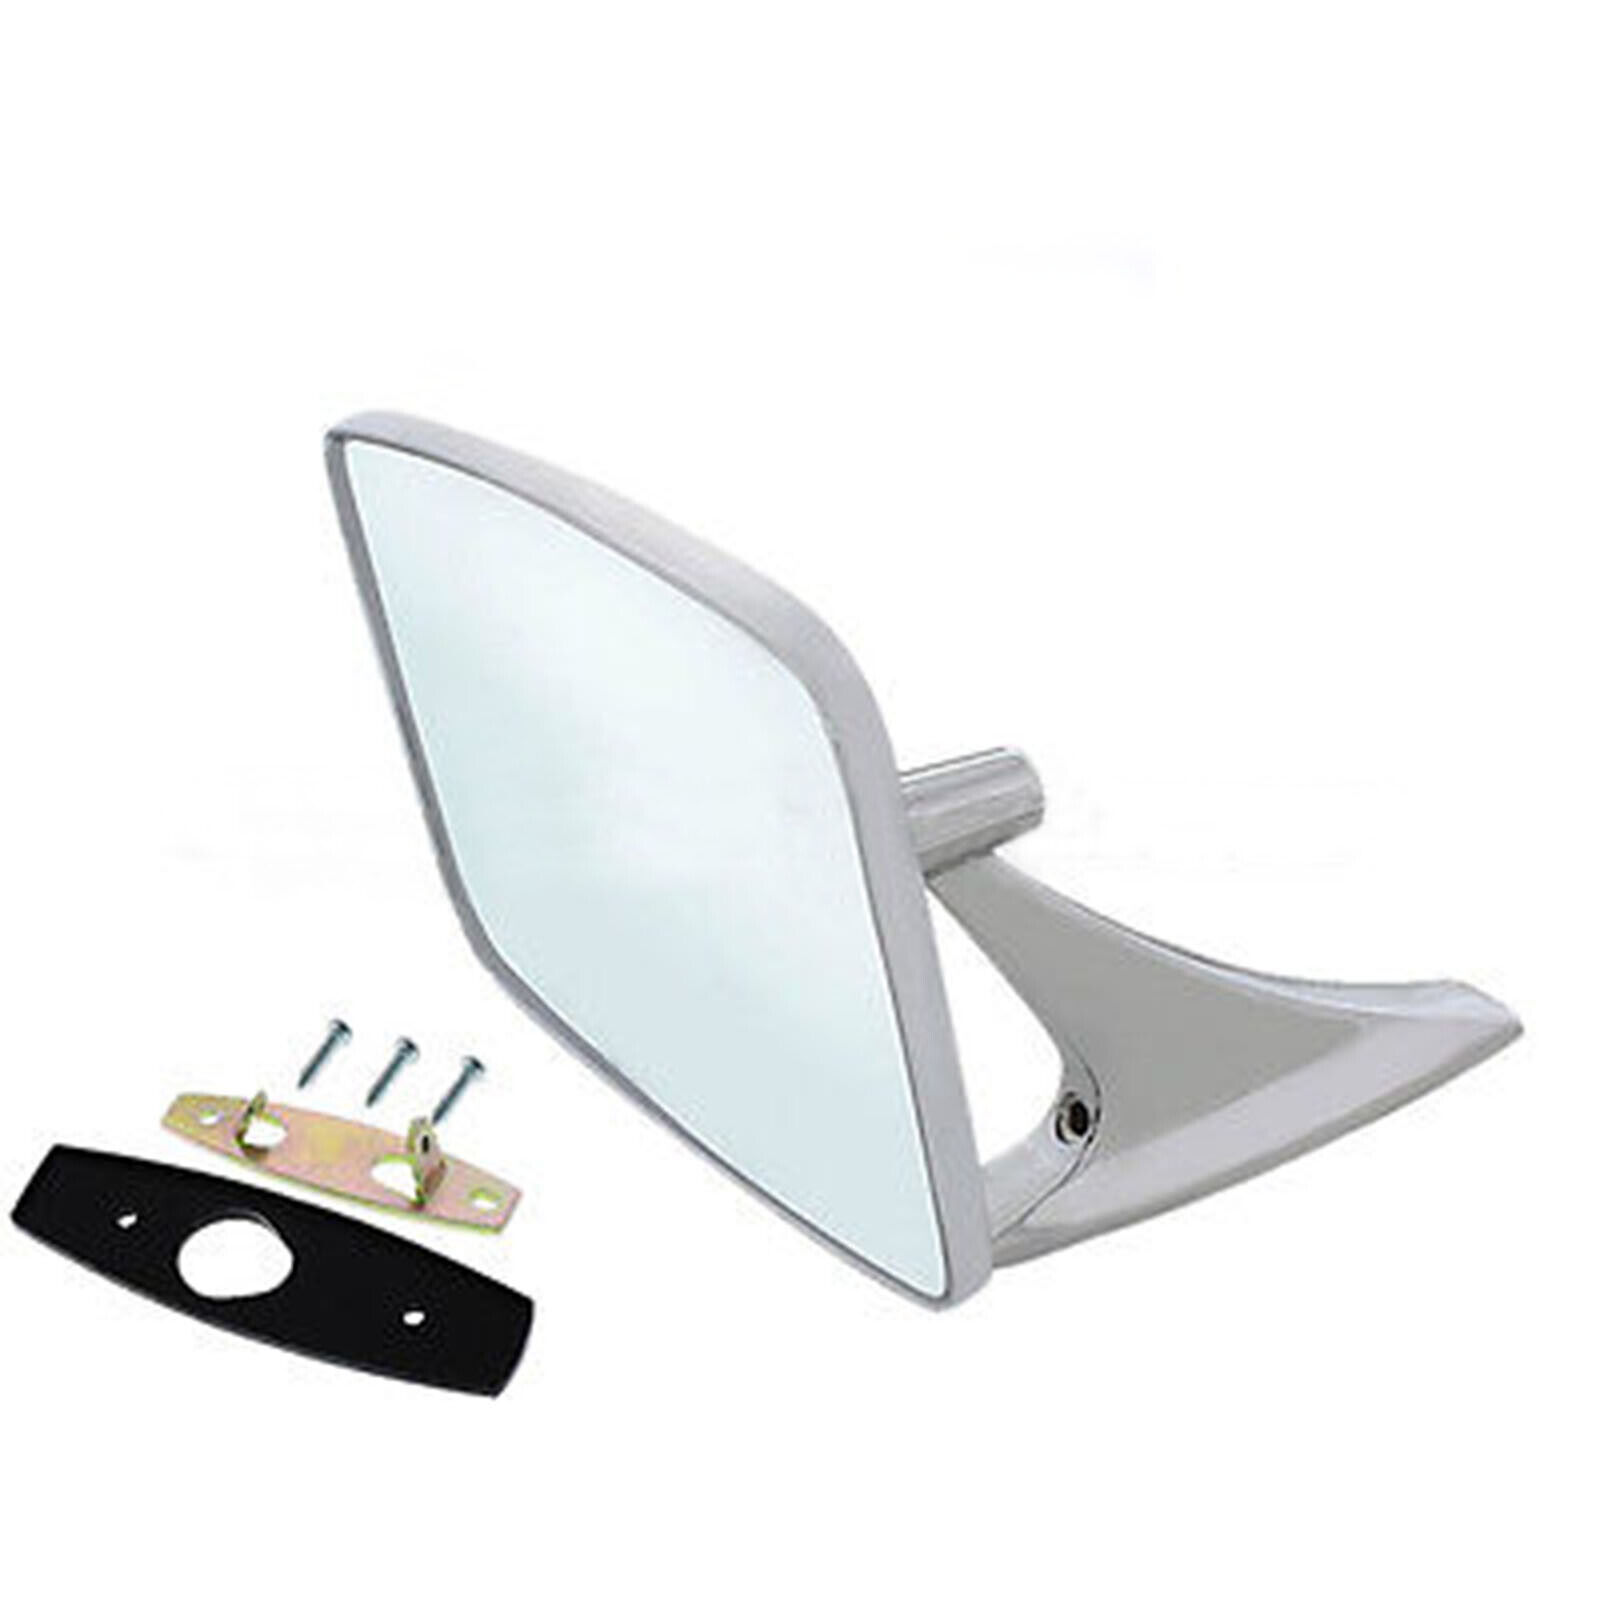 Primary image for 73-91 Chevy Truck Chrome Outside Exterior Rectangle Square Rear View Door Mirror